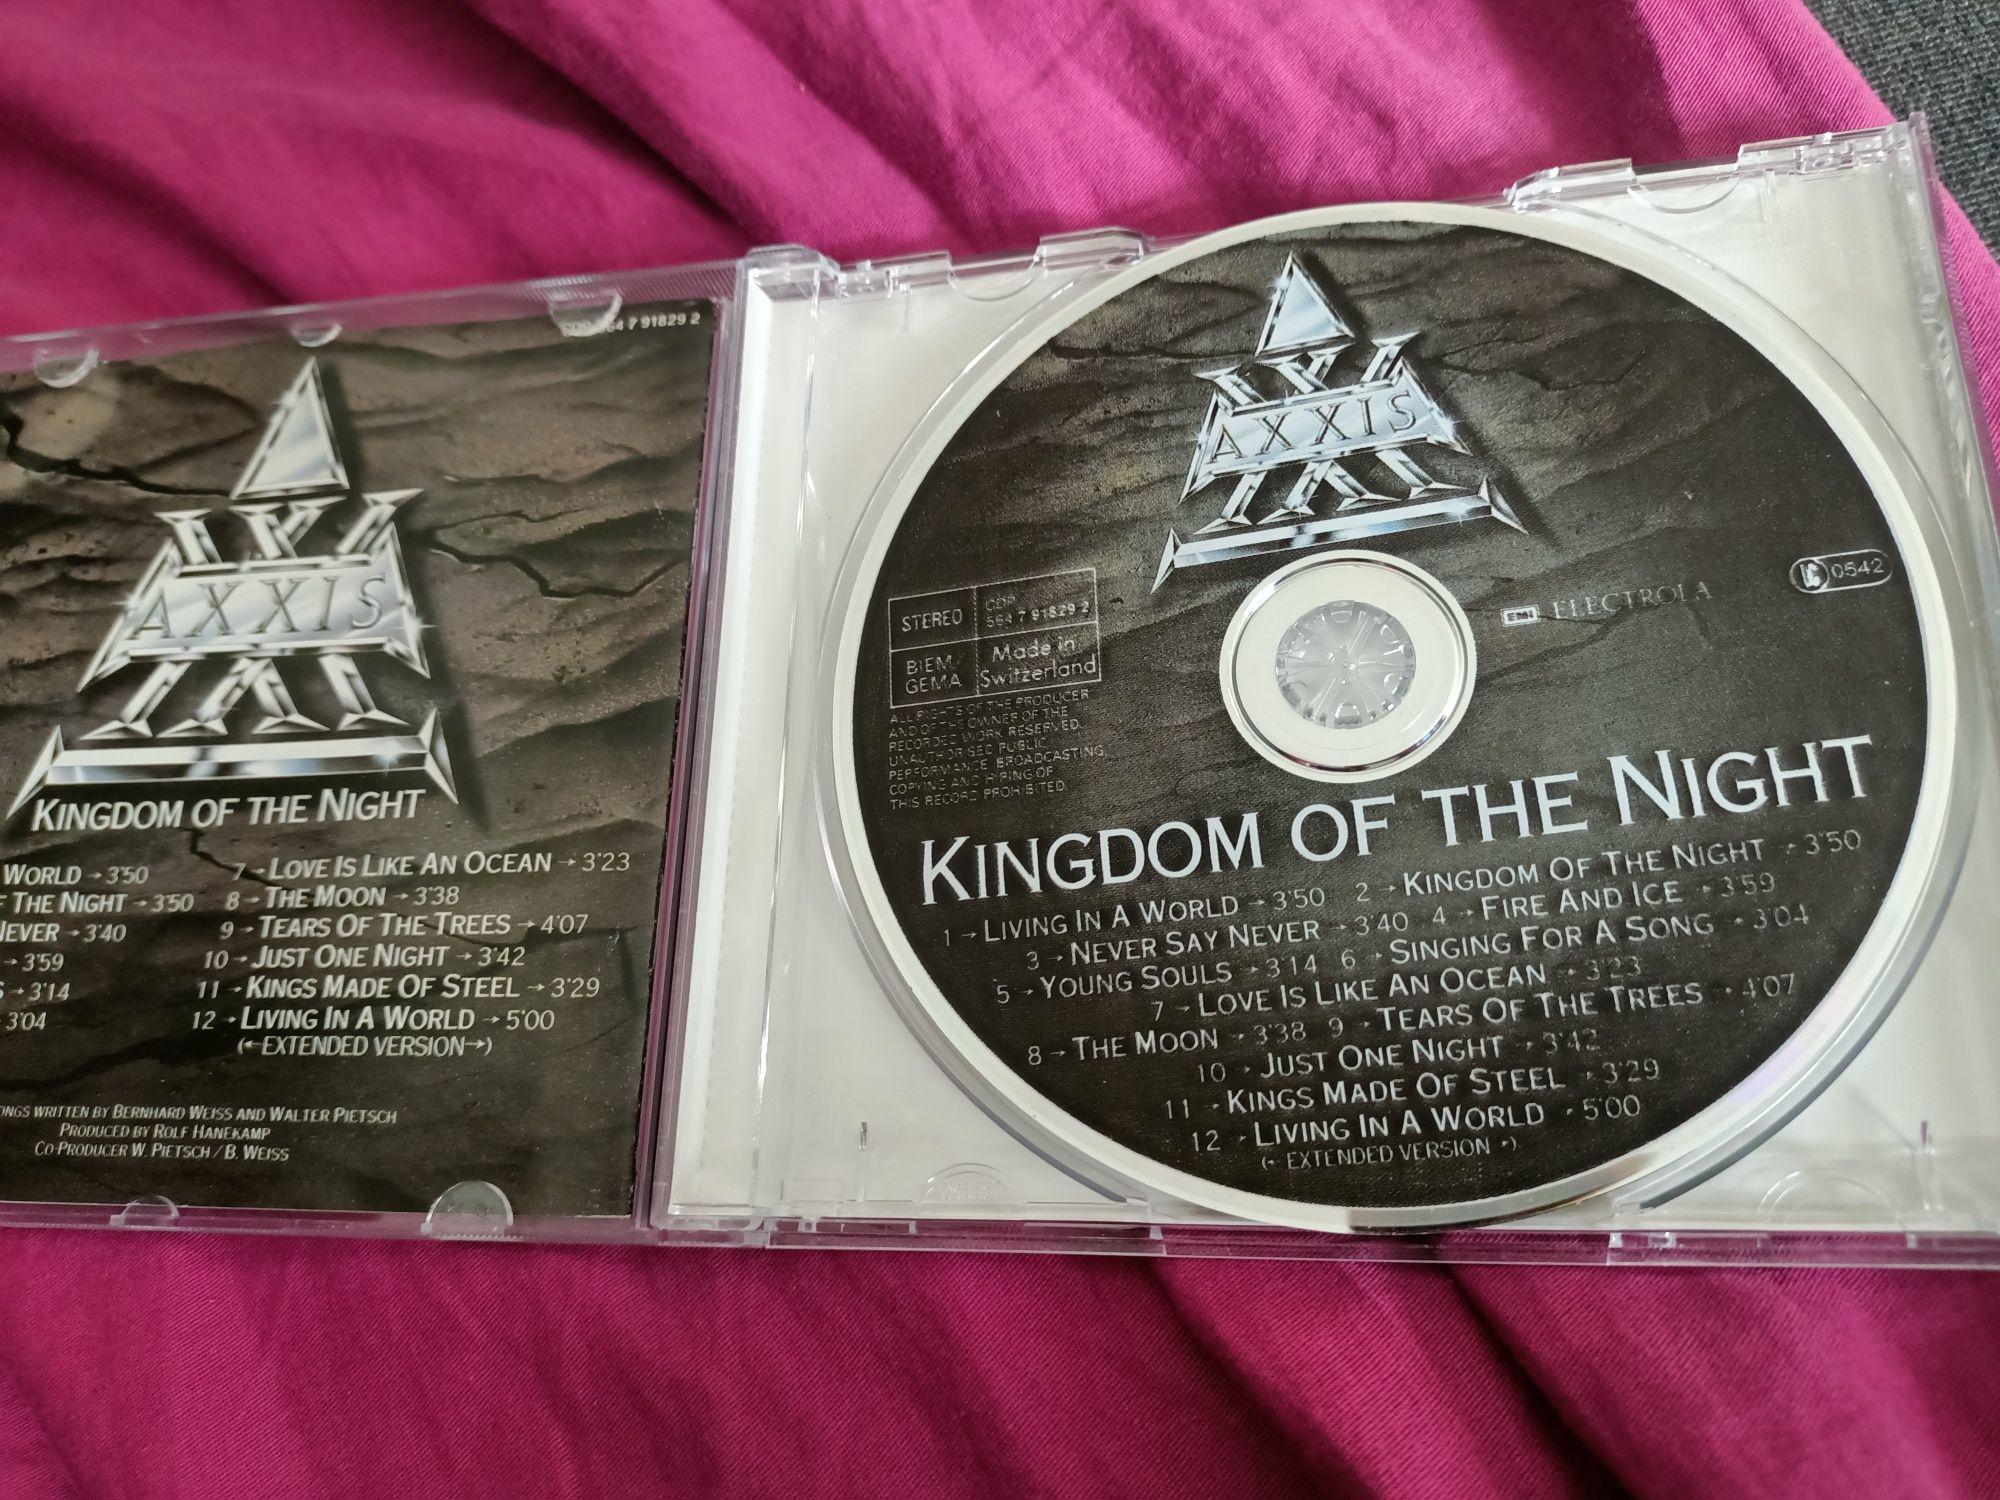 Axxis - Kingdom Of The Night (vg+)